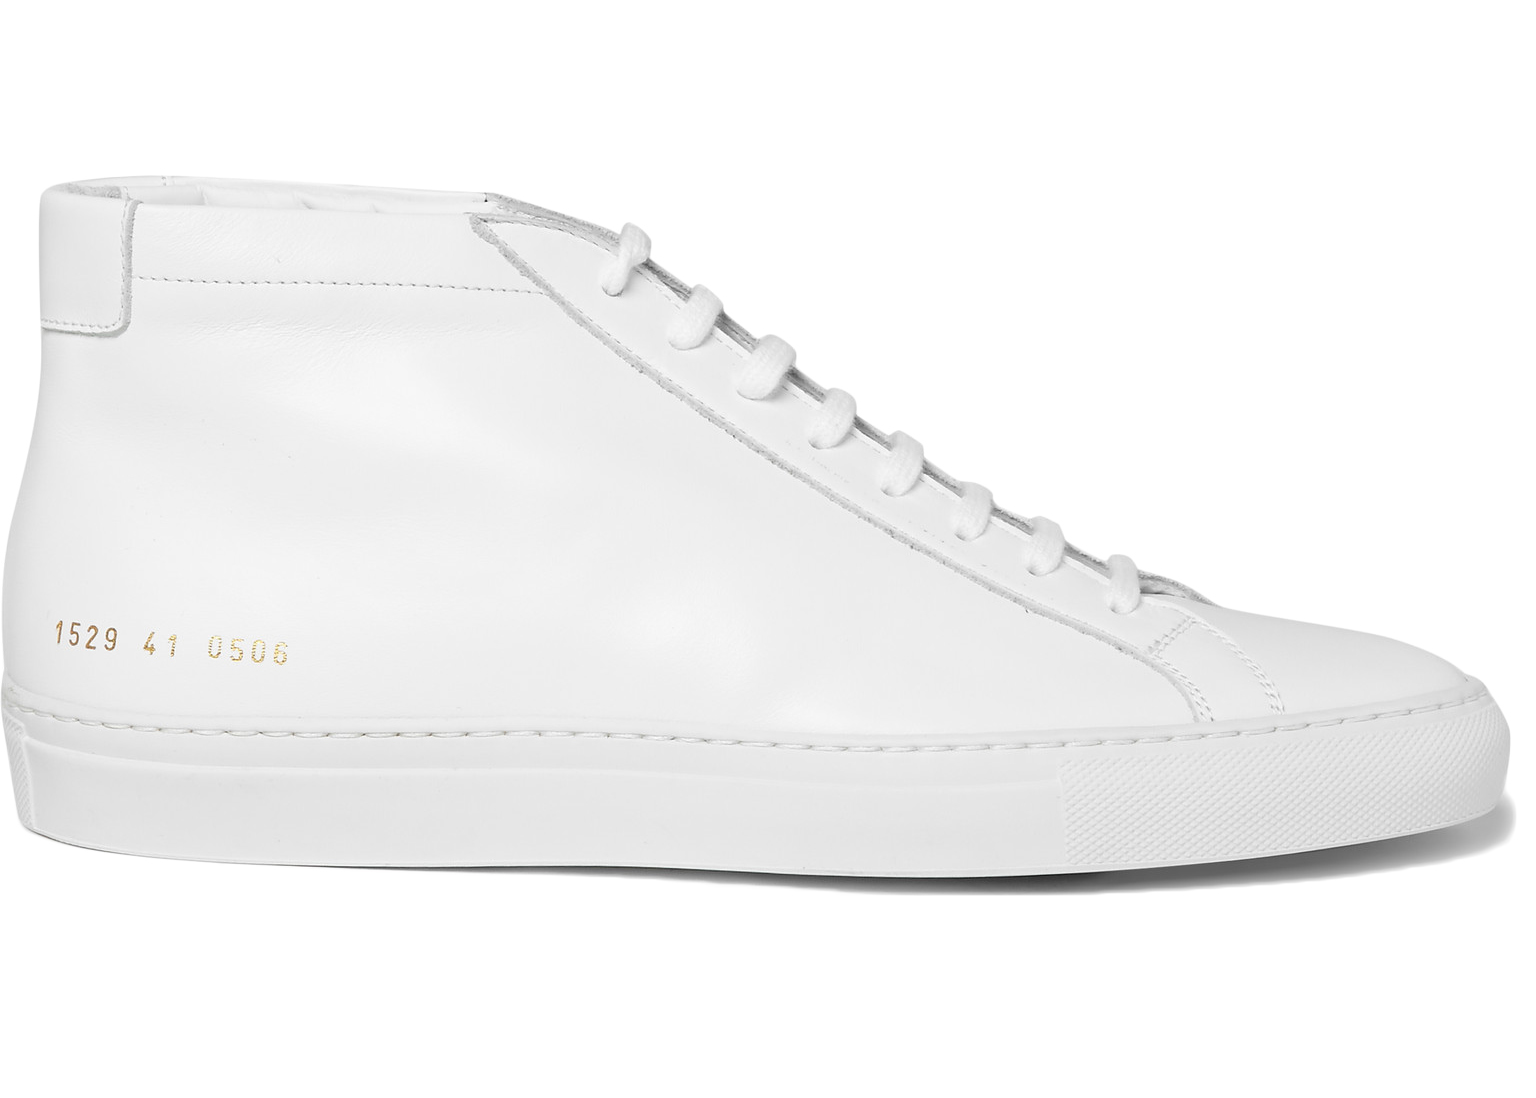 Common Projects Original Achilles High White